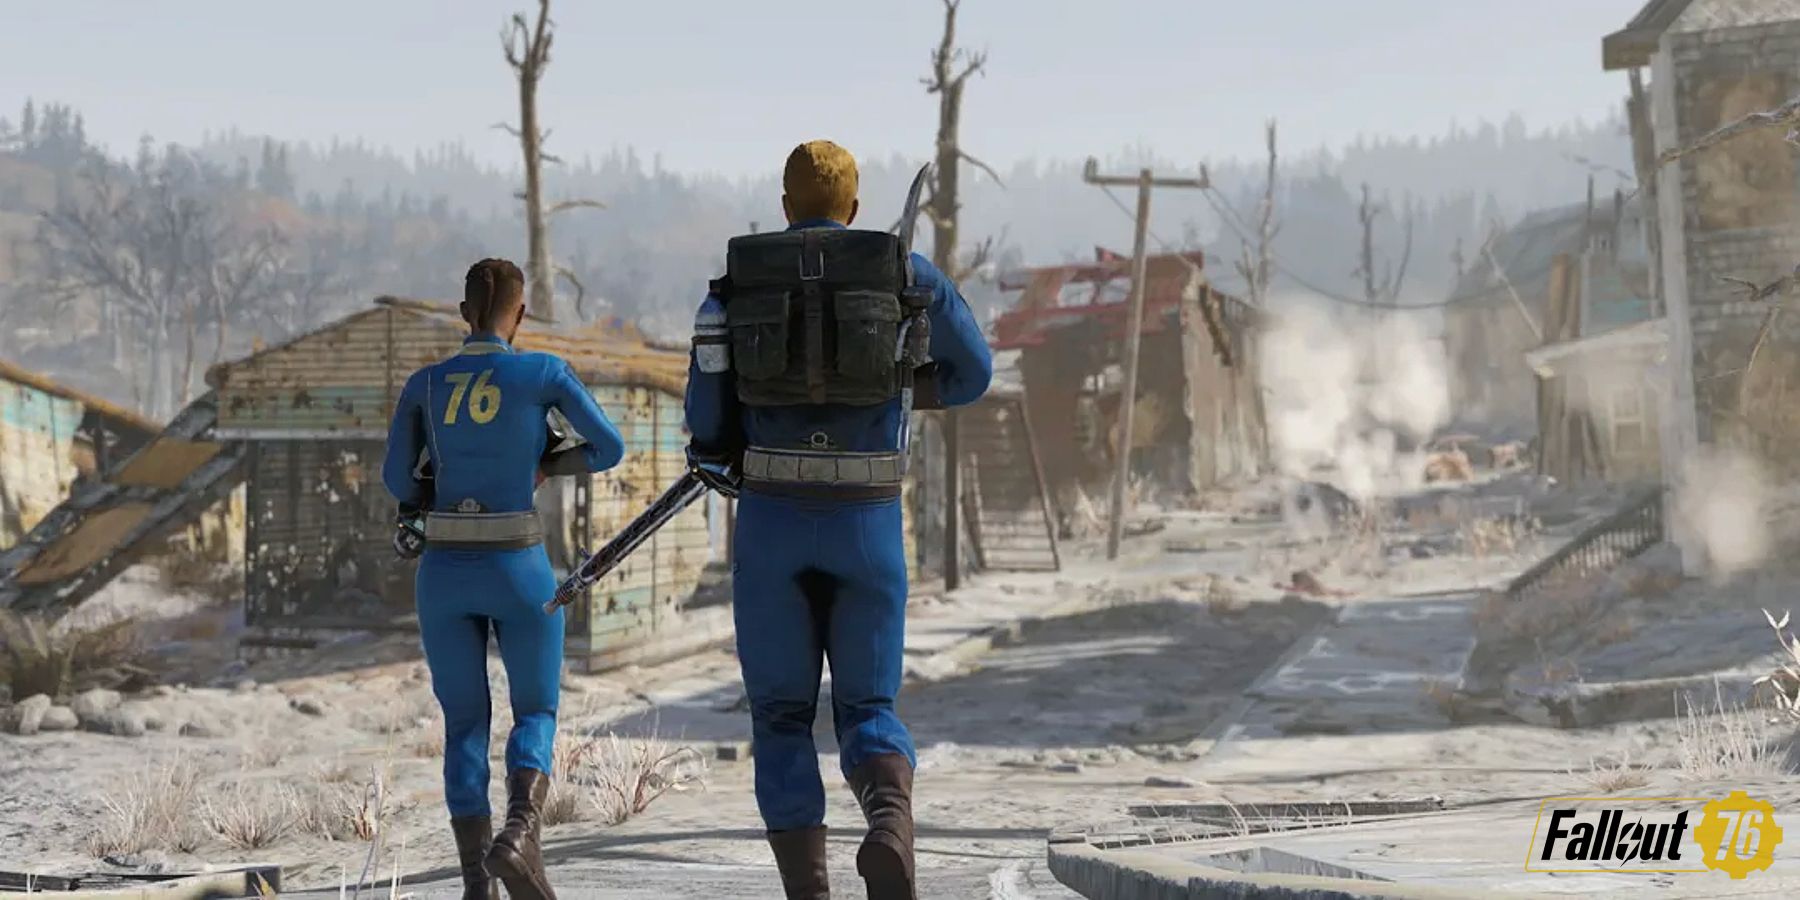 Fallout 76 two players exploring 76 vault suit